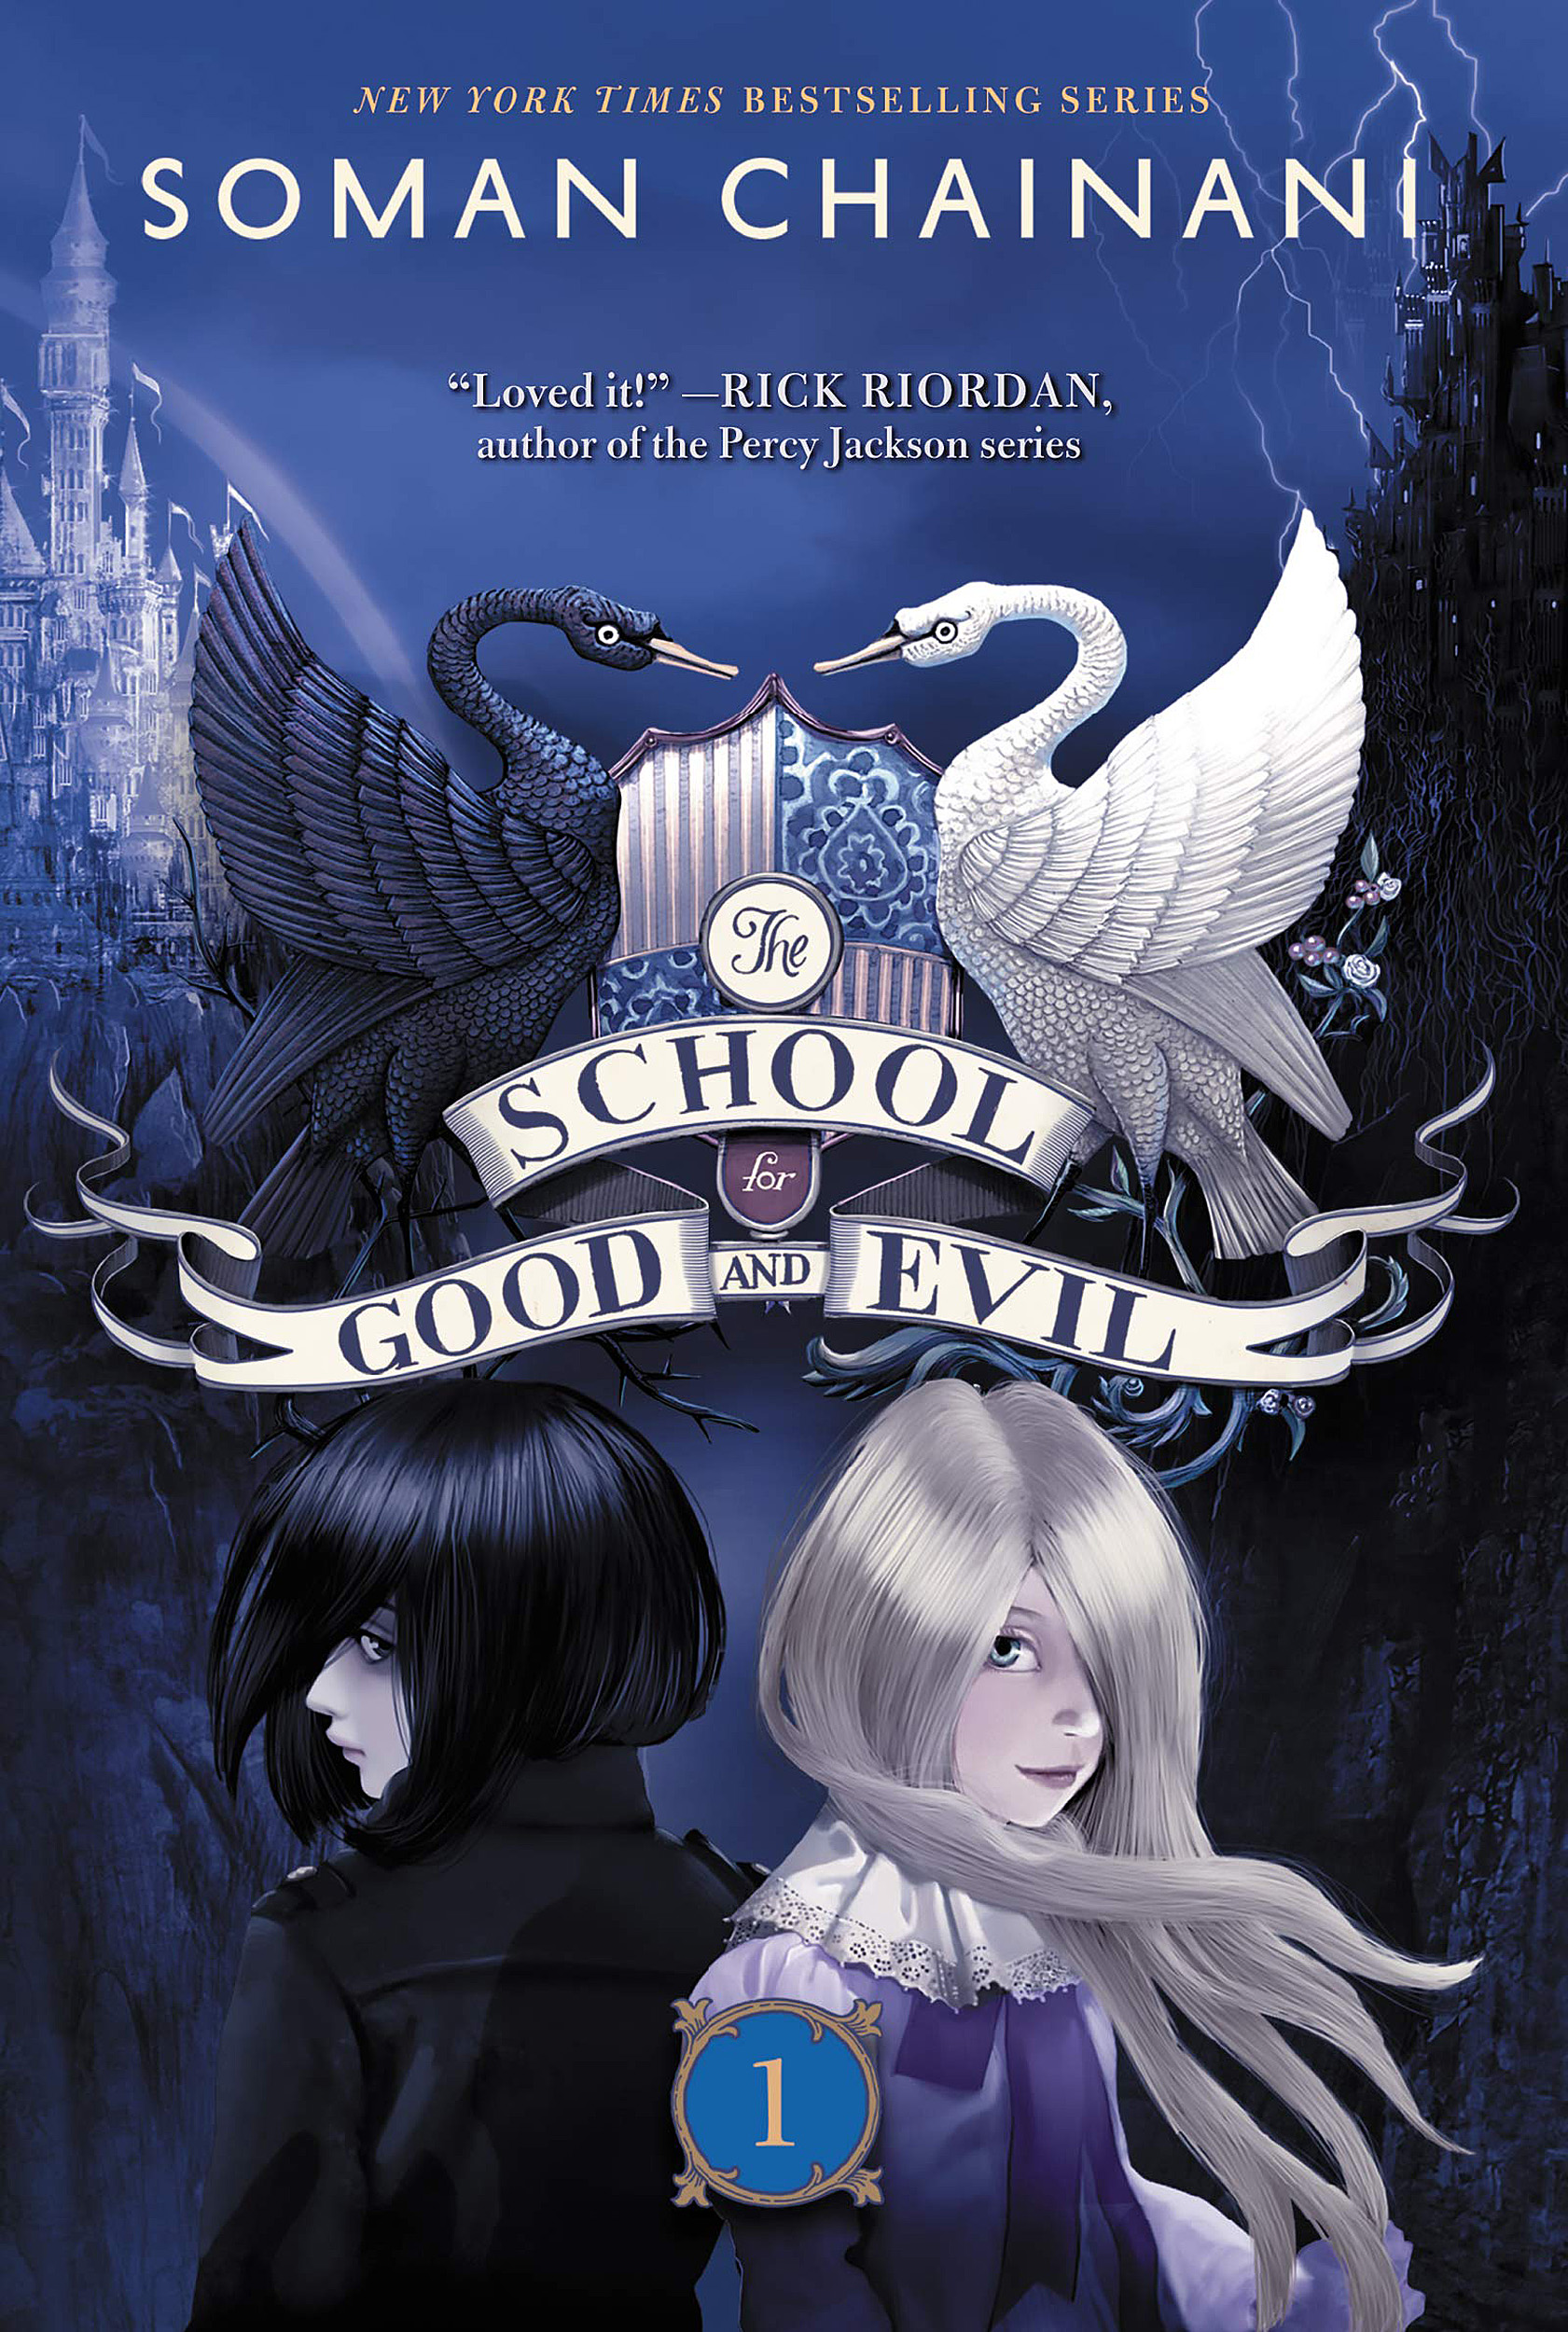 Book cover: “The School for Good and Evil” series by Soman Chainani.